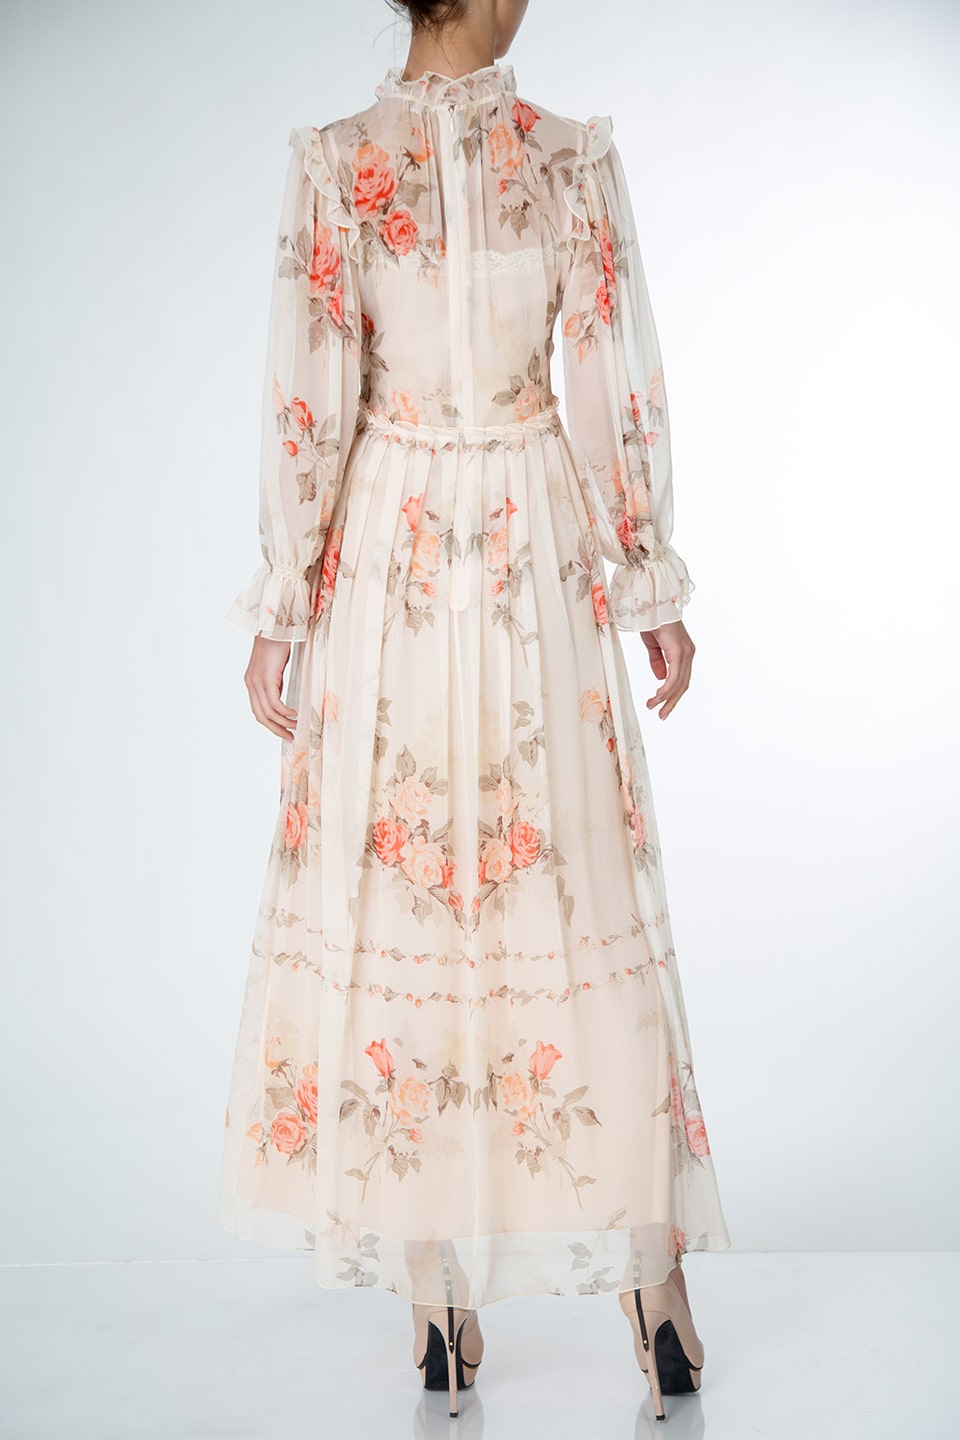 Midi dress from fashion designer in peach pink color with floral print, product view from behind